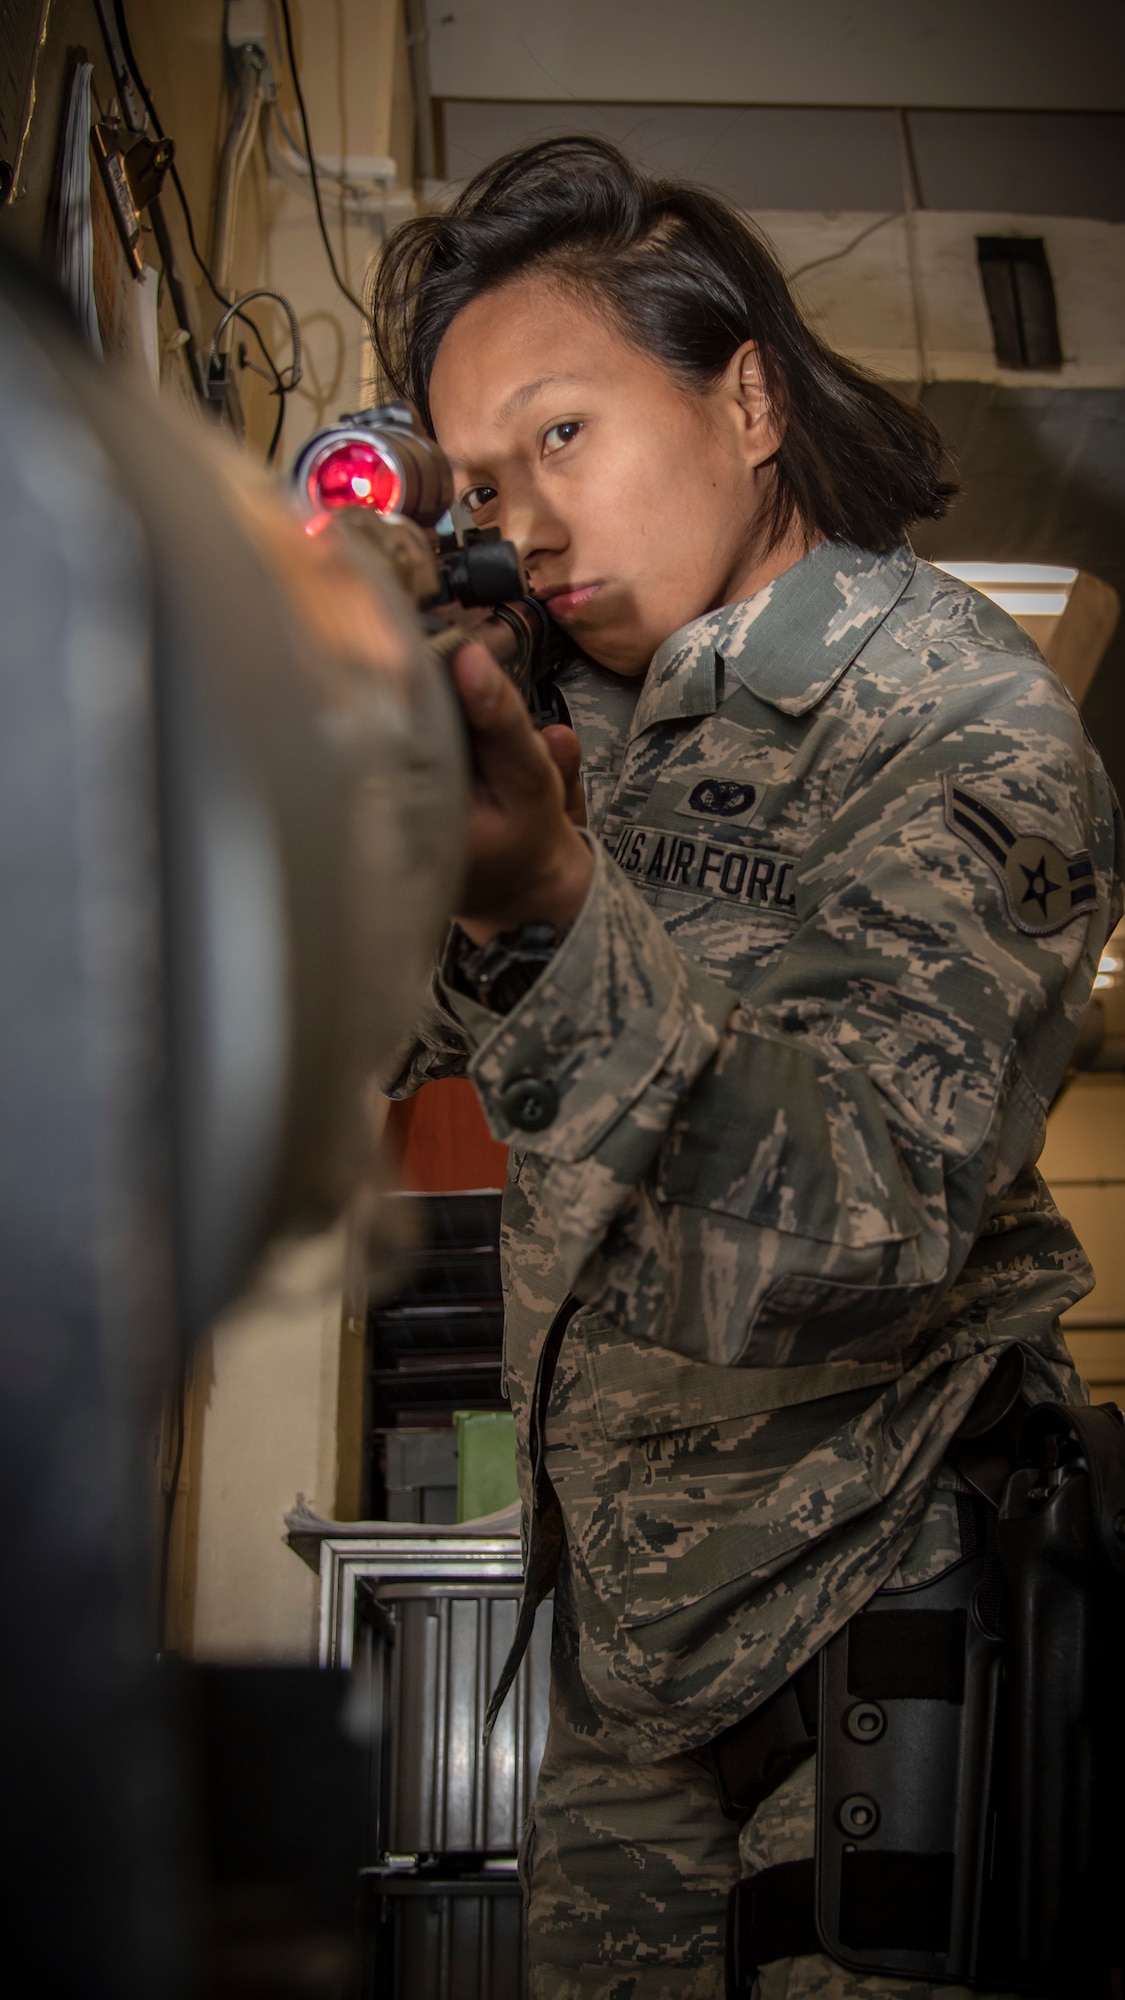 Airman 1st Class Jessica Carino, a 35th Security Forces Squadron armorer, ensures the M4 carbine assault rifle is clear and safe at Misawa Air Base, Japan, Dec. 18, 2019. Carino earned the Elizabeth N. Jacobson Award for Expeditionary Excellence, given for outstanding performance while deployed in Kunsan Air Base, South Korea. (U.S. Air Force photo by Airman 1st Class China M. Shock)